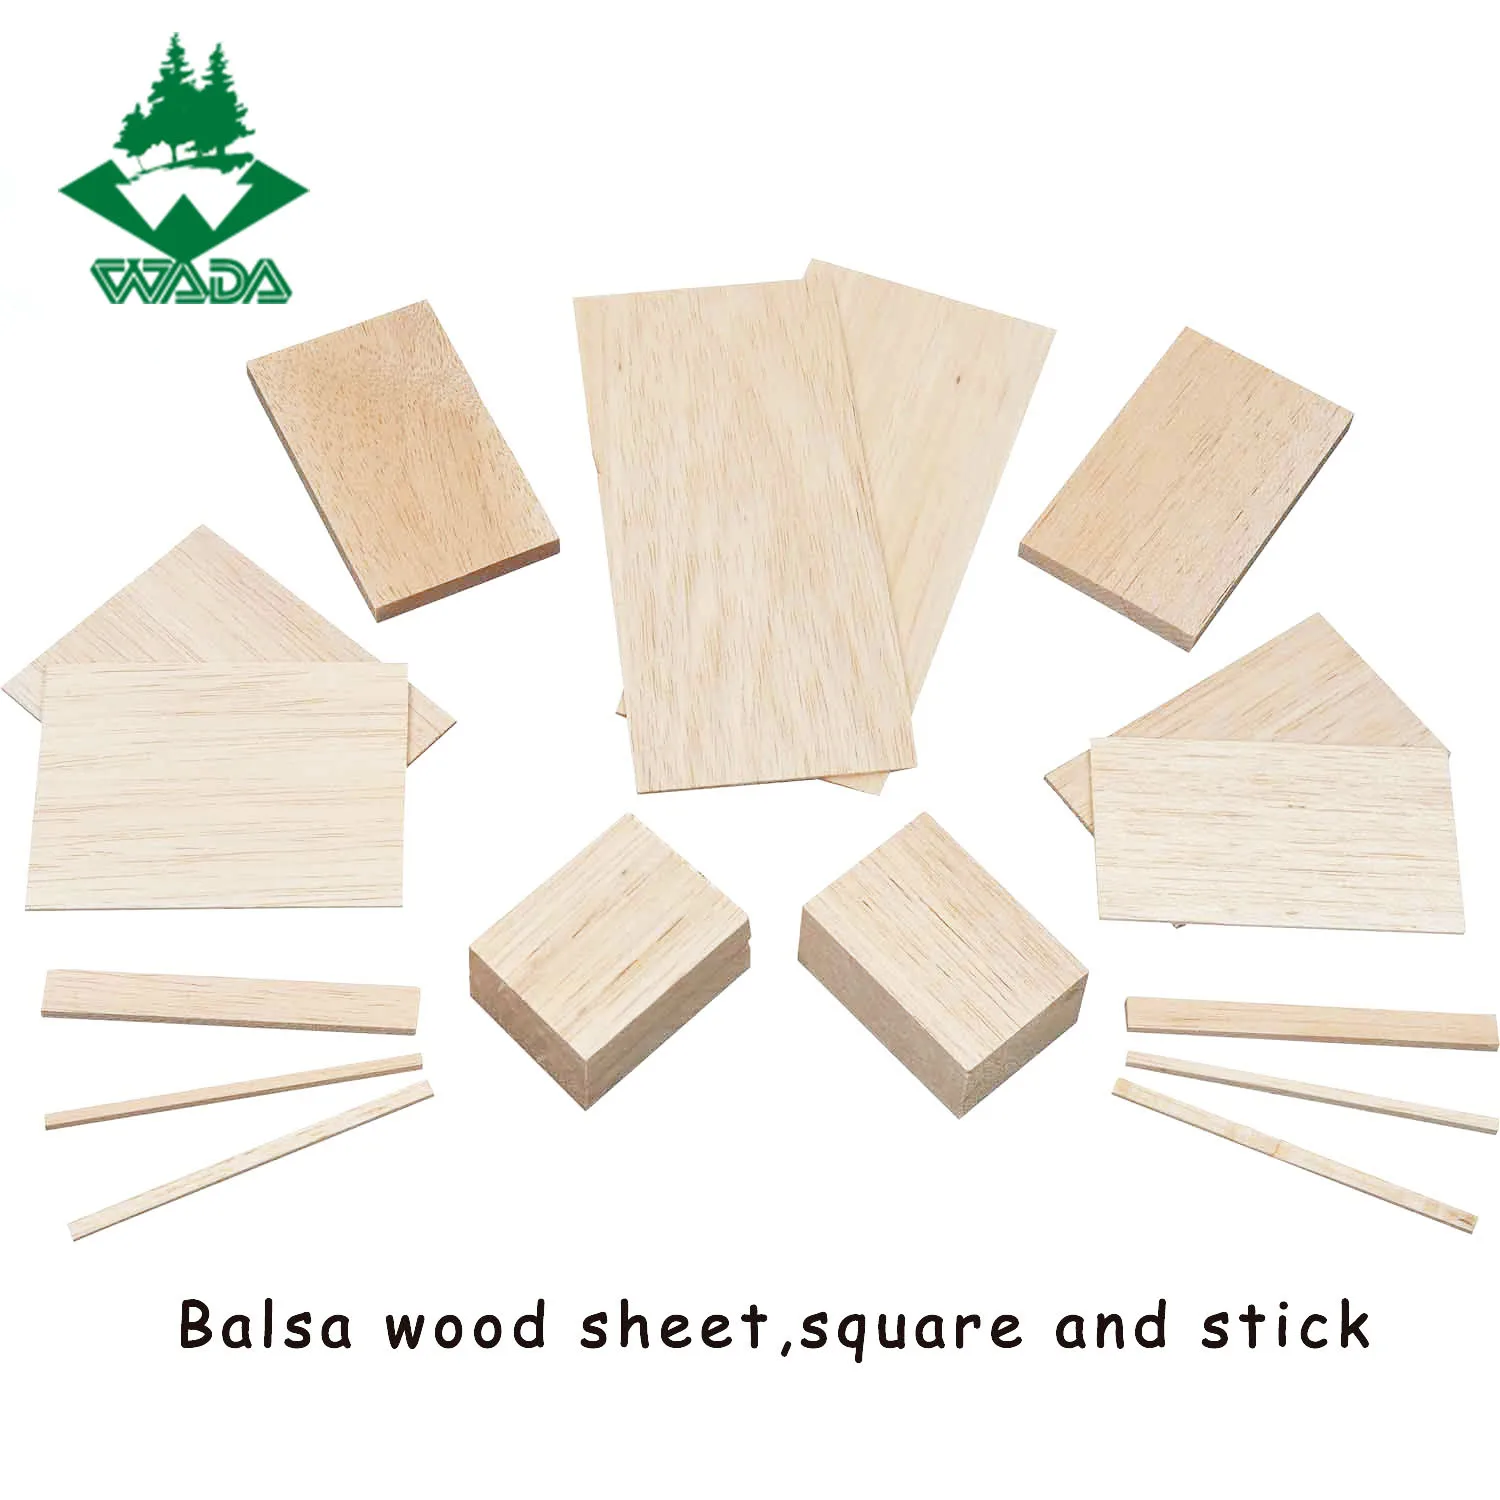 Fsc Balsa Of Thin Wood Boards For Crafts Material Timber Buy Balsa Wood Sheets Balsa Wood Airplane Balsa Wood Boxes Product On Alibaba Com